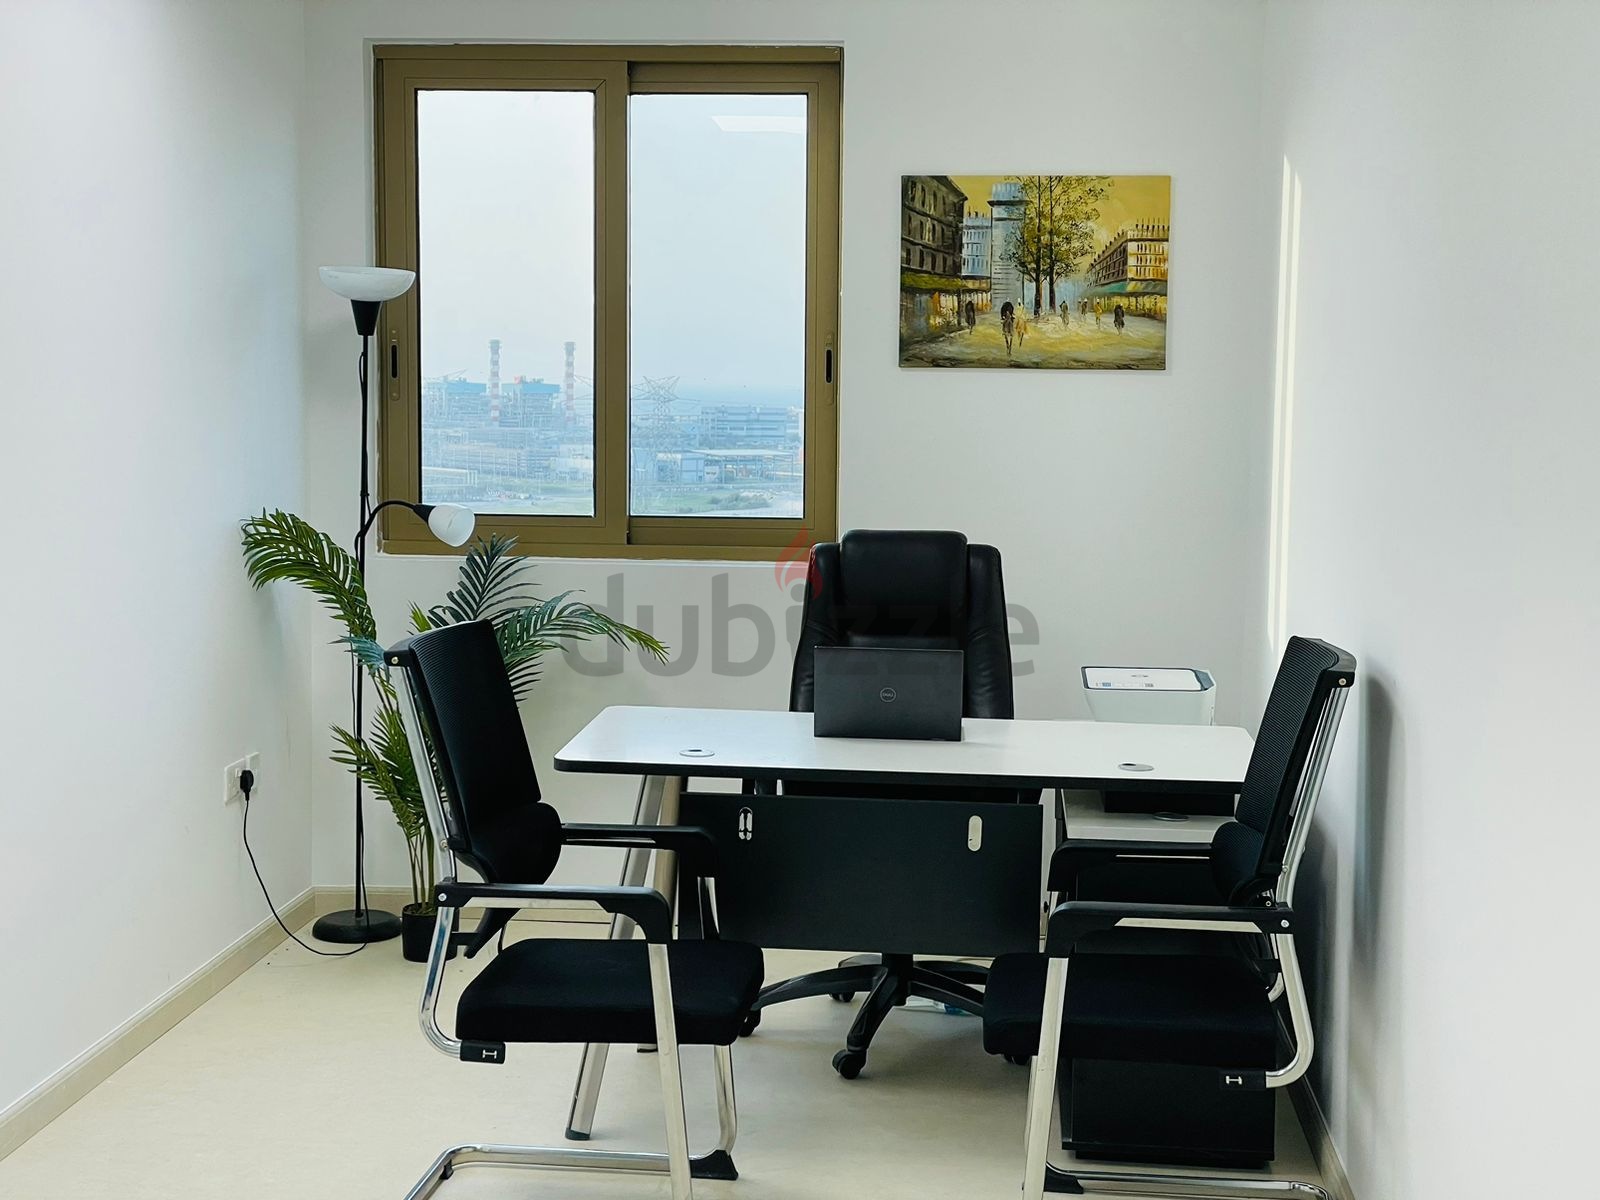 Executive Offices With All Amenities||ibn Battuta Gate || Corporate Ambiance.